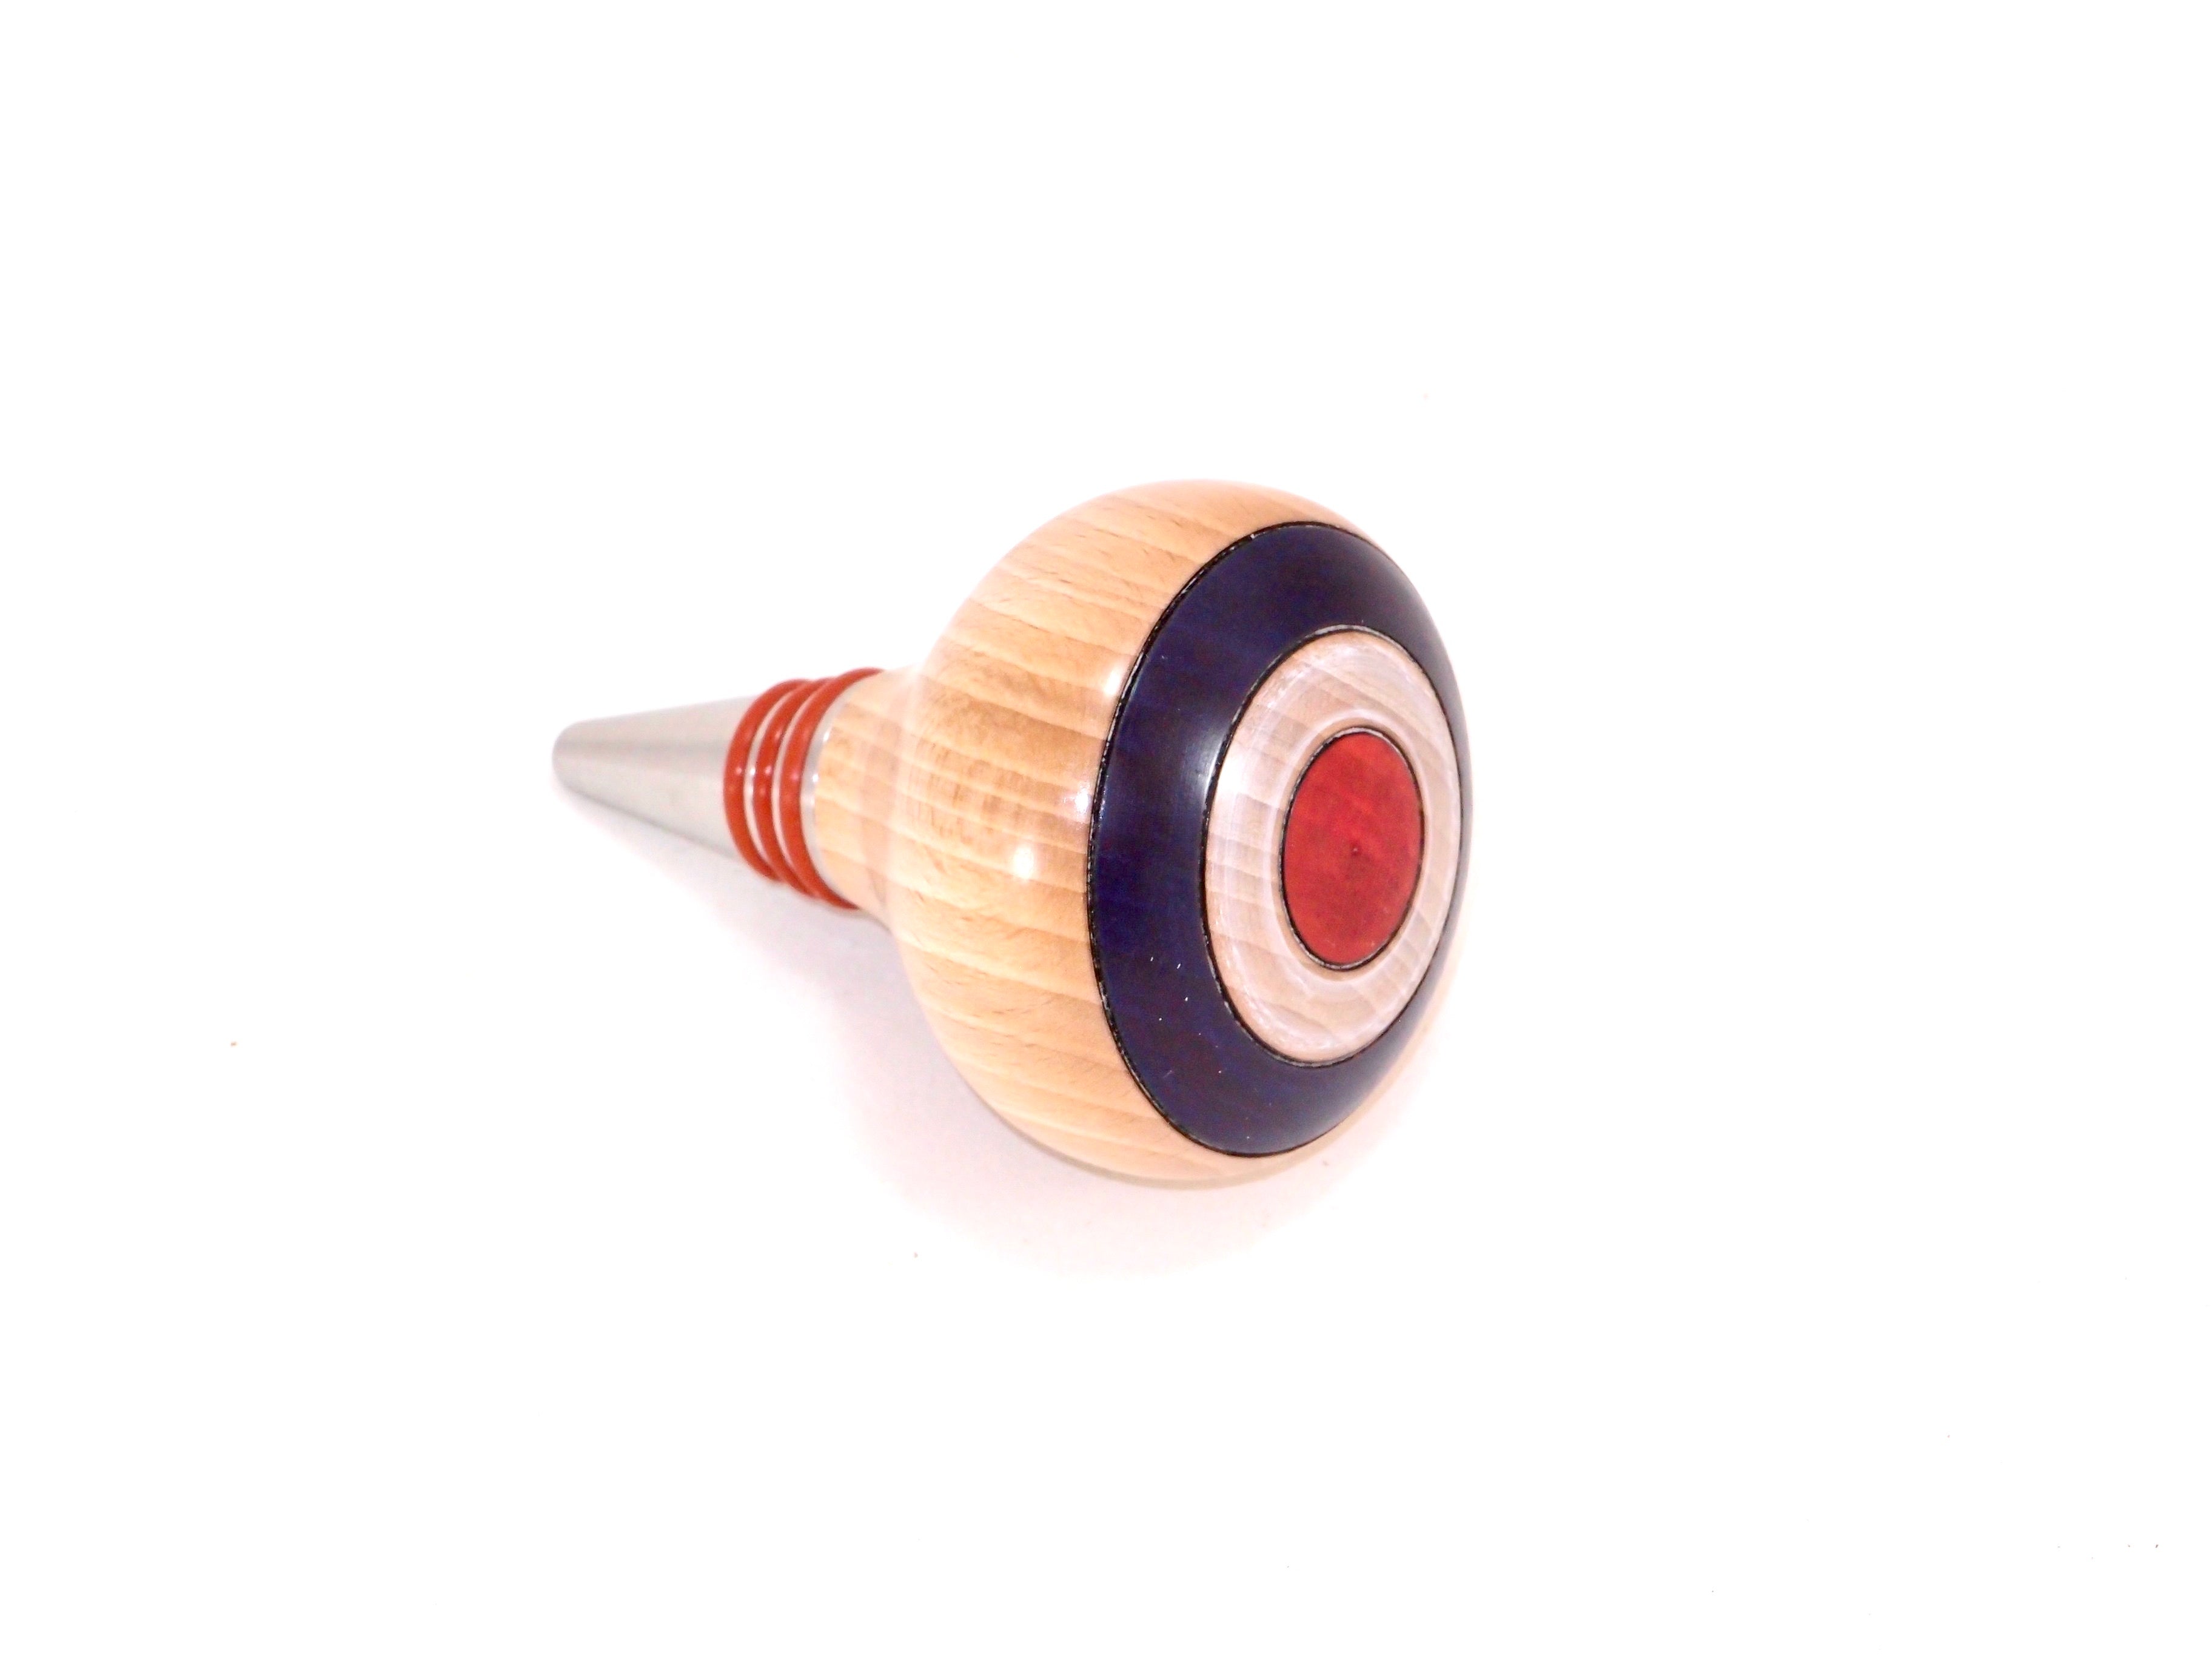 British Stainless Bottle Stopper | Woodturning project kit